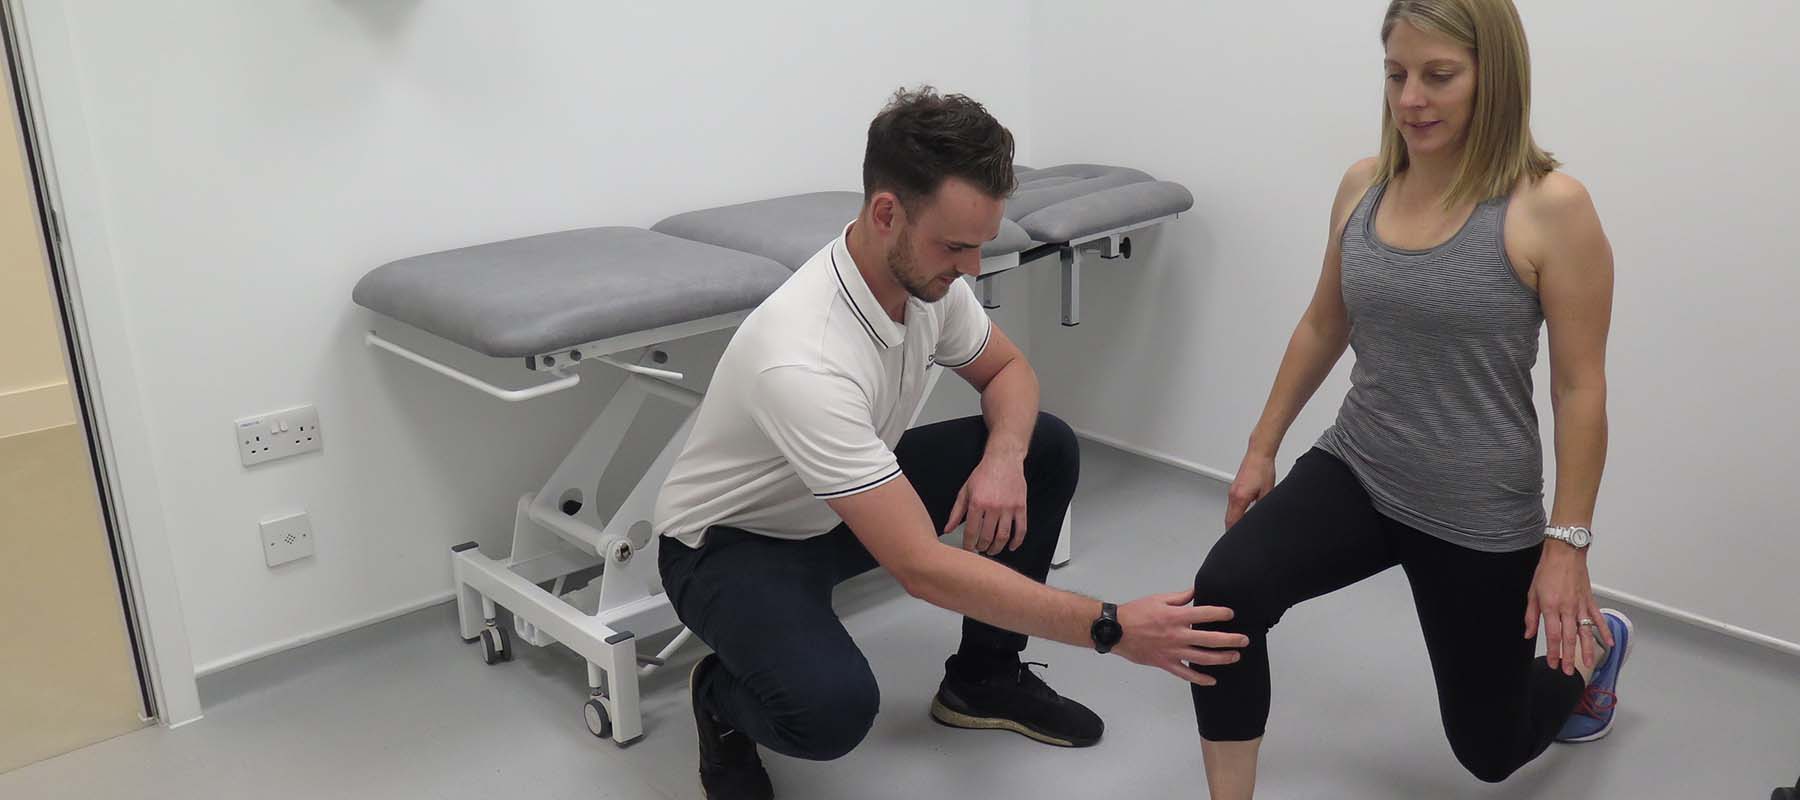 Physiotherapist supports knee of female patient doing a forward leg lunge